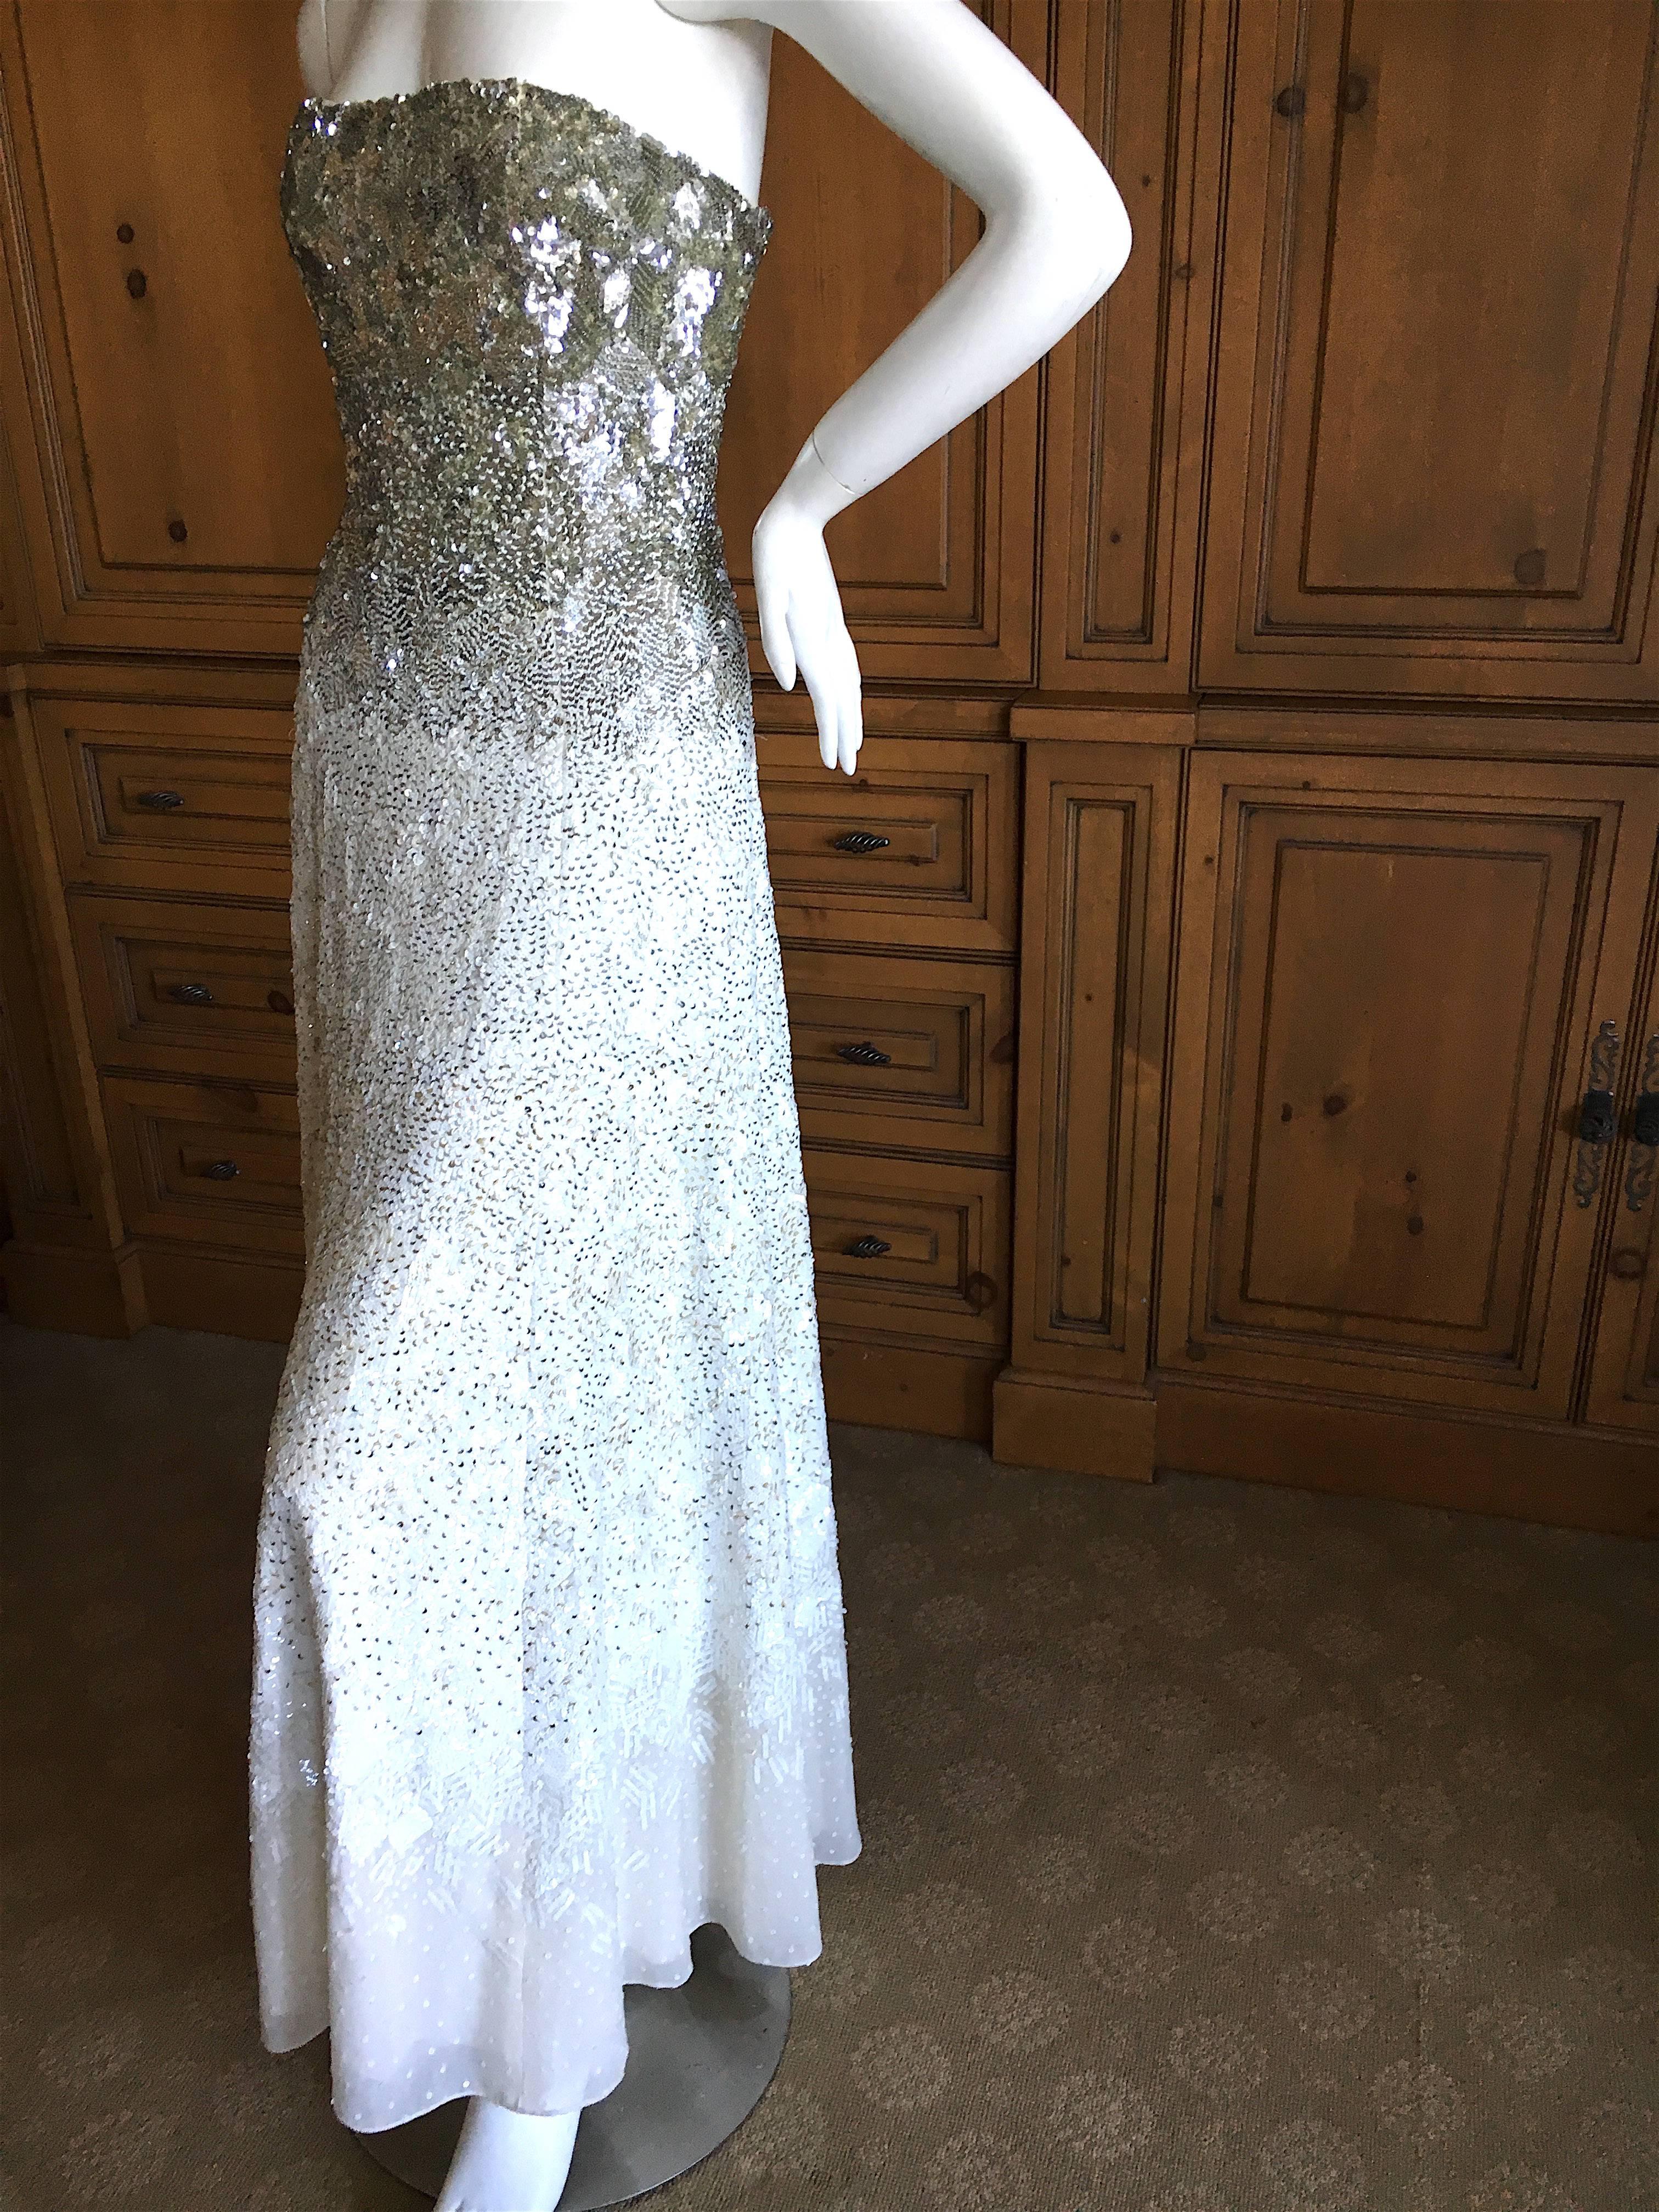 Oscar de la Renta Strapless Silver & White Sequin Evening Dress with Built in Corset.
This is extraordinary, the photos don't capture this completely embellished evening dress.
Size 0
Bust 33"
Waist 24"
HIps 44"
Length